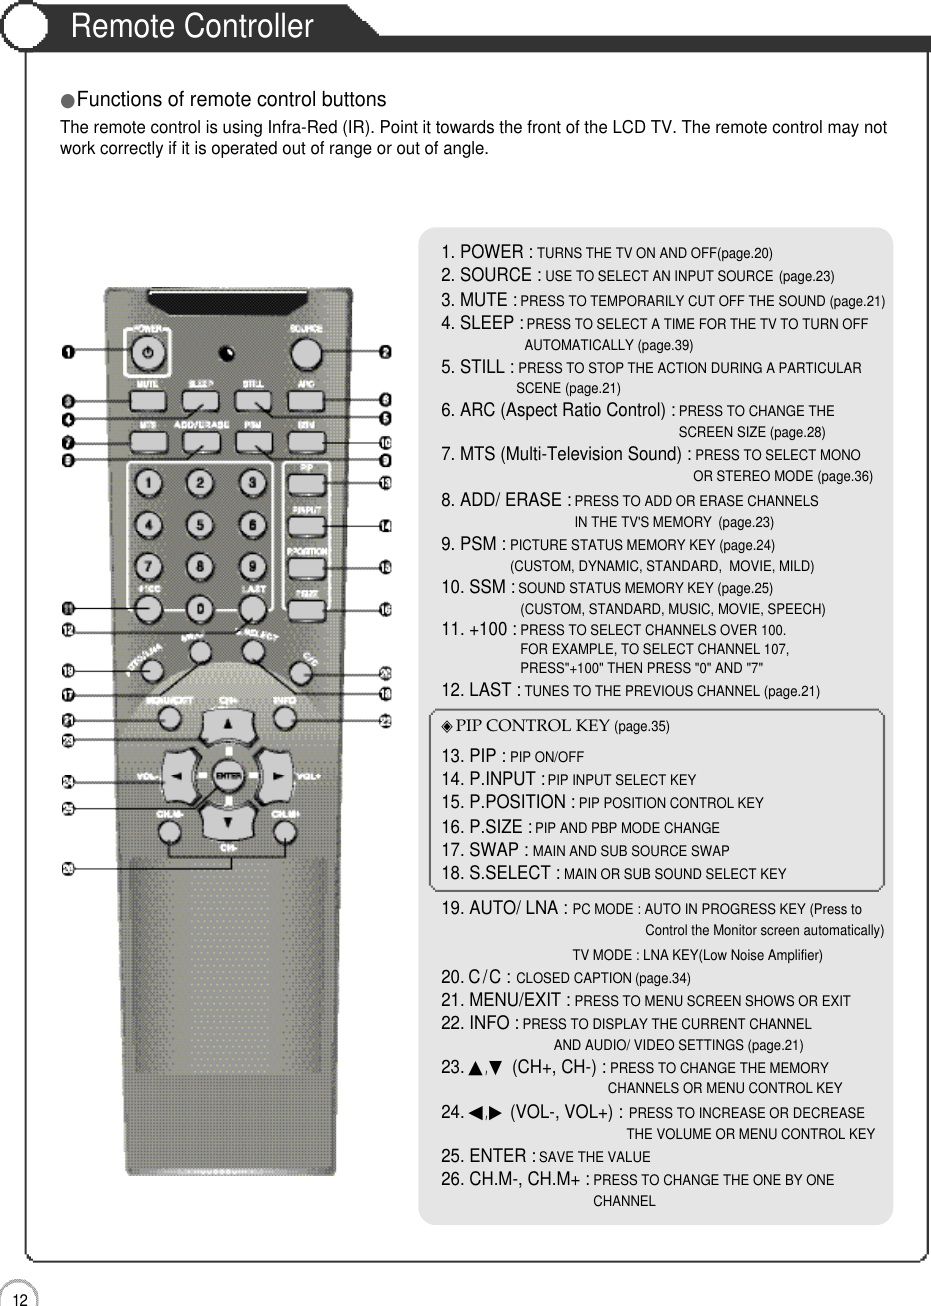 Remote Controller1 2User Guidance Information●Functions of remote control buttonsThe remote control is using Infra-Red (IR). Point it towards the front of the LCD TV. The remote control may notwork correctly if it is operated out of range or out of angle.1. POWER : TURNS THE TV ON AND OFF(page.20)2. SOURCE : USE TO SELECT AN INPUT SOURCE (page.23)3. MUTE : PRESS TO TEMPORARILY CUT OFF THE SOUND (page.21)4. SLEEP : PRESS TO SELECT A TIME FOR THE TV TO TURN OFFAUTOMATICALLY (page.39)5. STILL : PRESS TO STOP THE ACTION DURING A PARTICULAR SCENE (page.21)6. ARC (Aspect Ratio Control) : PRESS TO CHANGE THE SCREEN SIZE (page.28)7. MTS (Multi-Television Sound) : PRESS TO SELECT MONO OR STEREO MODE (page.36)8. ADD/ ERASE : PRESS TO ADD OR ERASE CHANNELSIN THE TV&apos;S MEMORY (page.23)9. PSM : PICTURE STATUS MEMORY KEY (page.24) (CUSTOM, DYNAMIC, STANDARD,  MOVIE, MILD)10. SSM : SOUND STATUS MEMORY KEY (page.25) (CUSTOM, STANDARD, MUSIC, MOVIE, SPEECH)11. +100 : PRESS TO SELECT CHANNELS OVER 100.FOR EXAMPLE, TO SELECT CHANNEL 107, PRESS&quot;+100&quot; THEN PRESS &quot;0&quot; AND &quot;7&quot;12. LAST : TUNES TO THE PREVIOUS CHANNEL (page.21)◈PIP CONTROL KEY (page.35)13. PIP : PIP ON/OFF14. P.INPUT :PIP INPUT SELECT KEY15. P.POSITION : PIP POSITION CONTROL KEY16. P.SIZE : PIP AND PBP MODE CHANGE17. SWAP : MAIN AND SUB SOURCE SWAP18. S.SELECT : MAIN OR SUB SOUND SELECT KEY19. AUTO/ LNA : PC MODE : AUTO IN PROGRESS KEY (Press toControl the Monitor screen automatically)TV MODE : LNA KEY(Low Noise Amplifier)20. C/C : CLOSED CAPTION (page.34)21. MENU/EXIT : PRESS TO MENU SCREEN SHOWS OR EXIT22. INFO : PRESS TO DISPLAY THE CURRENT CHANNEL AND AUDIO/ VIDEO SETTINGS (page.21)23. ▲,▼(CH+, CH-) : PRESS TO CHANGE THE MEMORY CHANNELS OR MENU CONTROL KEY24. ◀,▶(VOL-, VOL+) : PRESS TO INCREASE OR DECREASETHE VOLUME OR MENU CONTROL KEY 25. ENTER : SAVE THE VALUE26. CH.M-, CH.M+ : PRESS TO CHANGE THE ONE BY ONECHANNEL